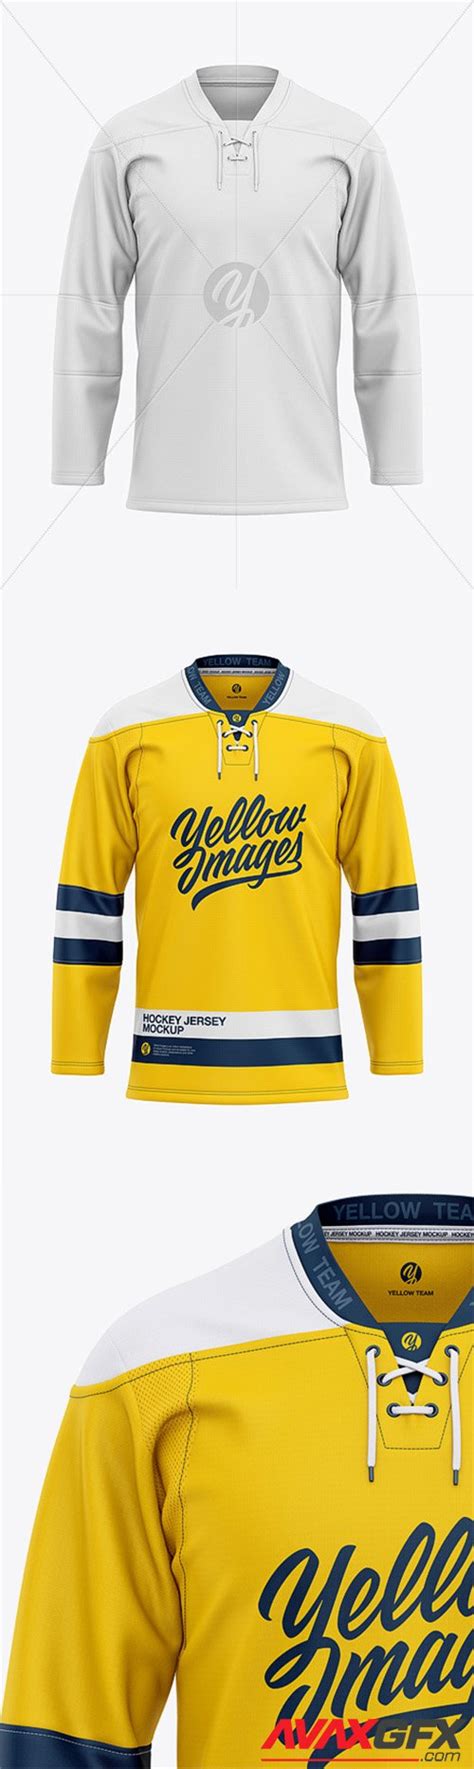 Mens Lace Neck Hockey Jersey Mockup Front View 40199 Avaxgfx All